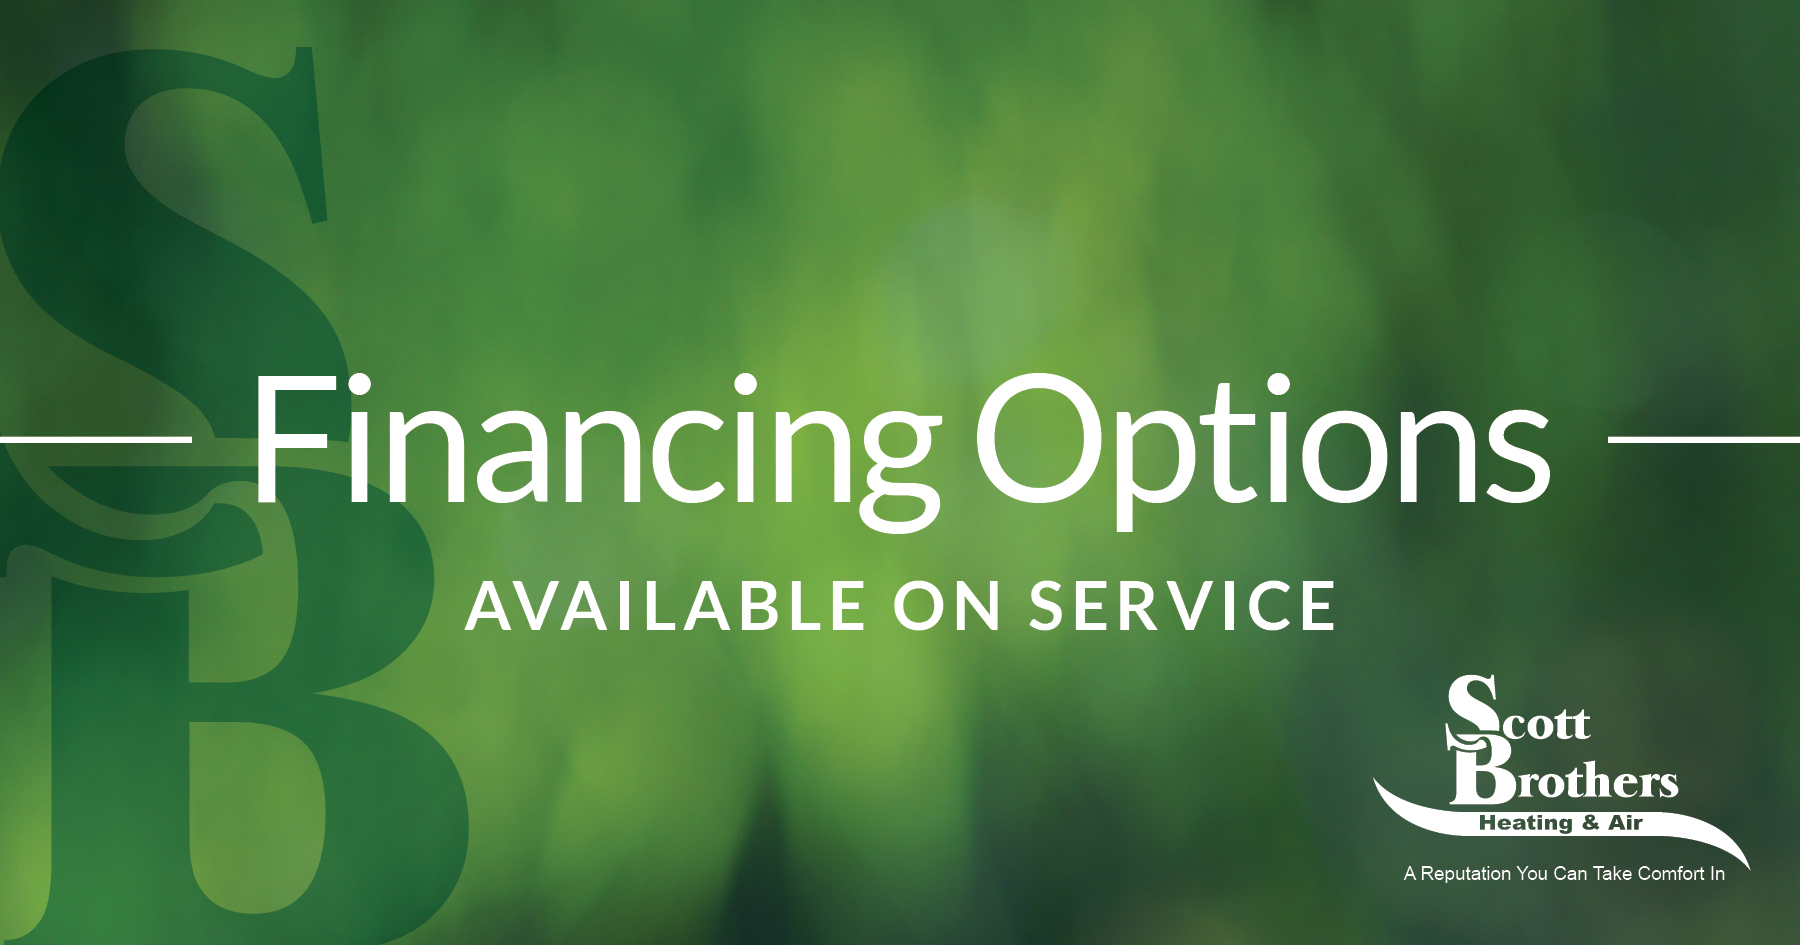 Financing options available on service.